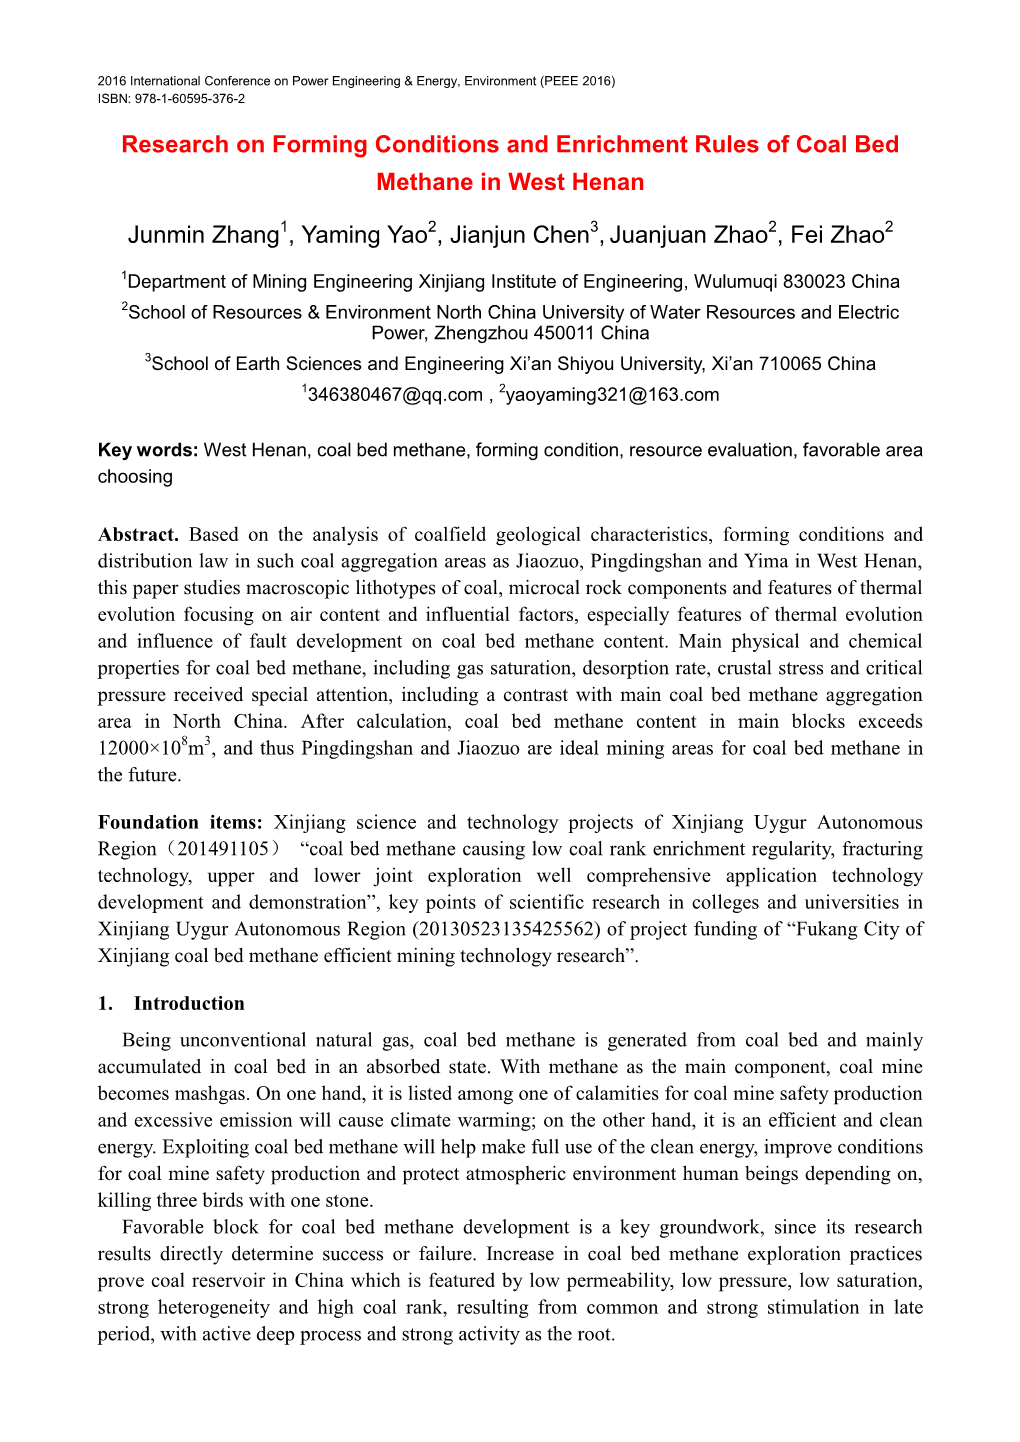 Research on Forming Conditions and Enrichment Rules of Coal Bed Methane in West Henan